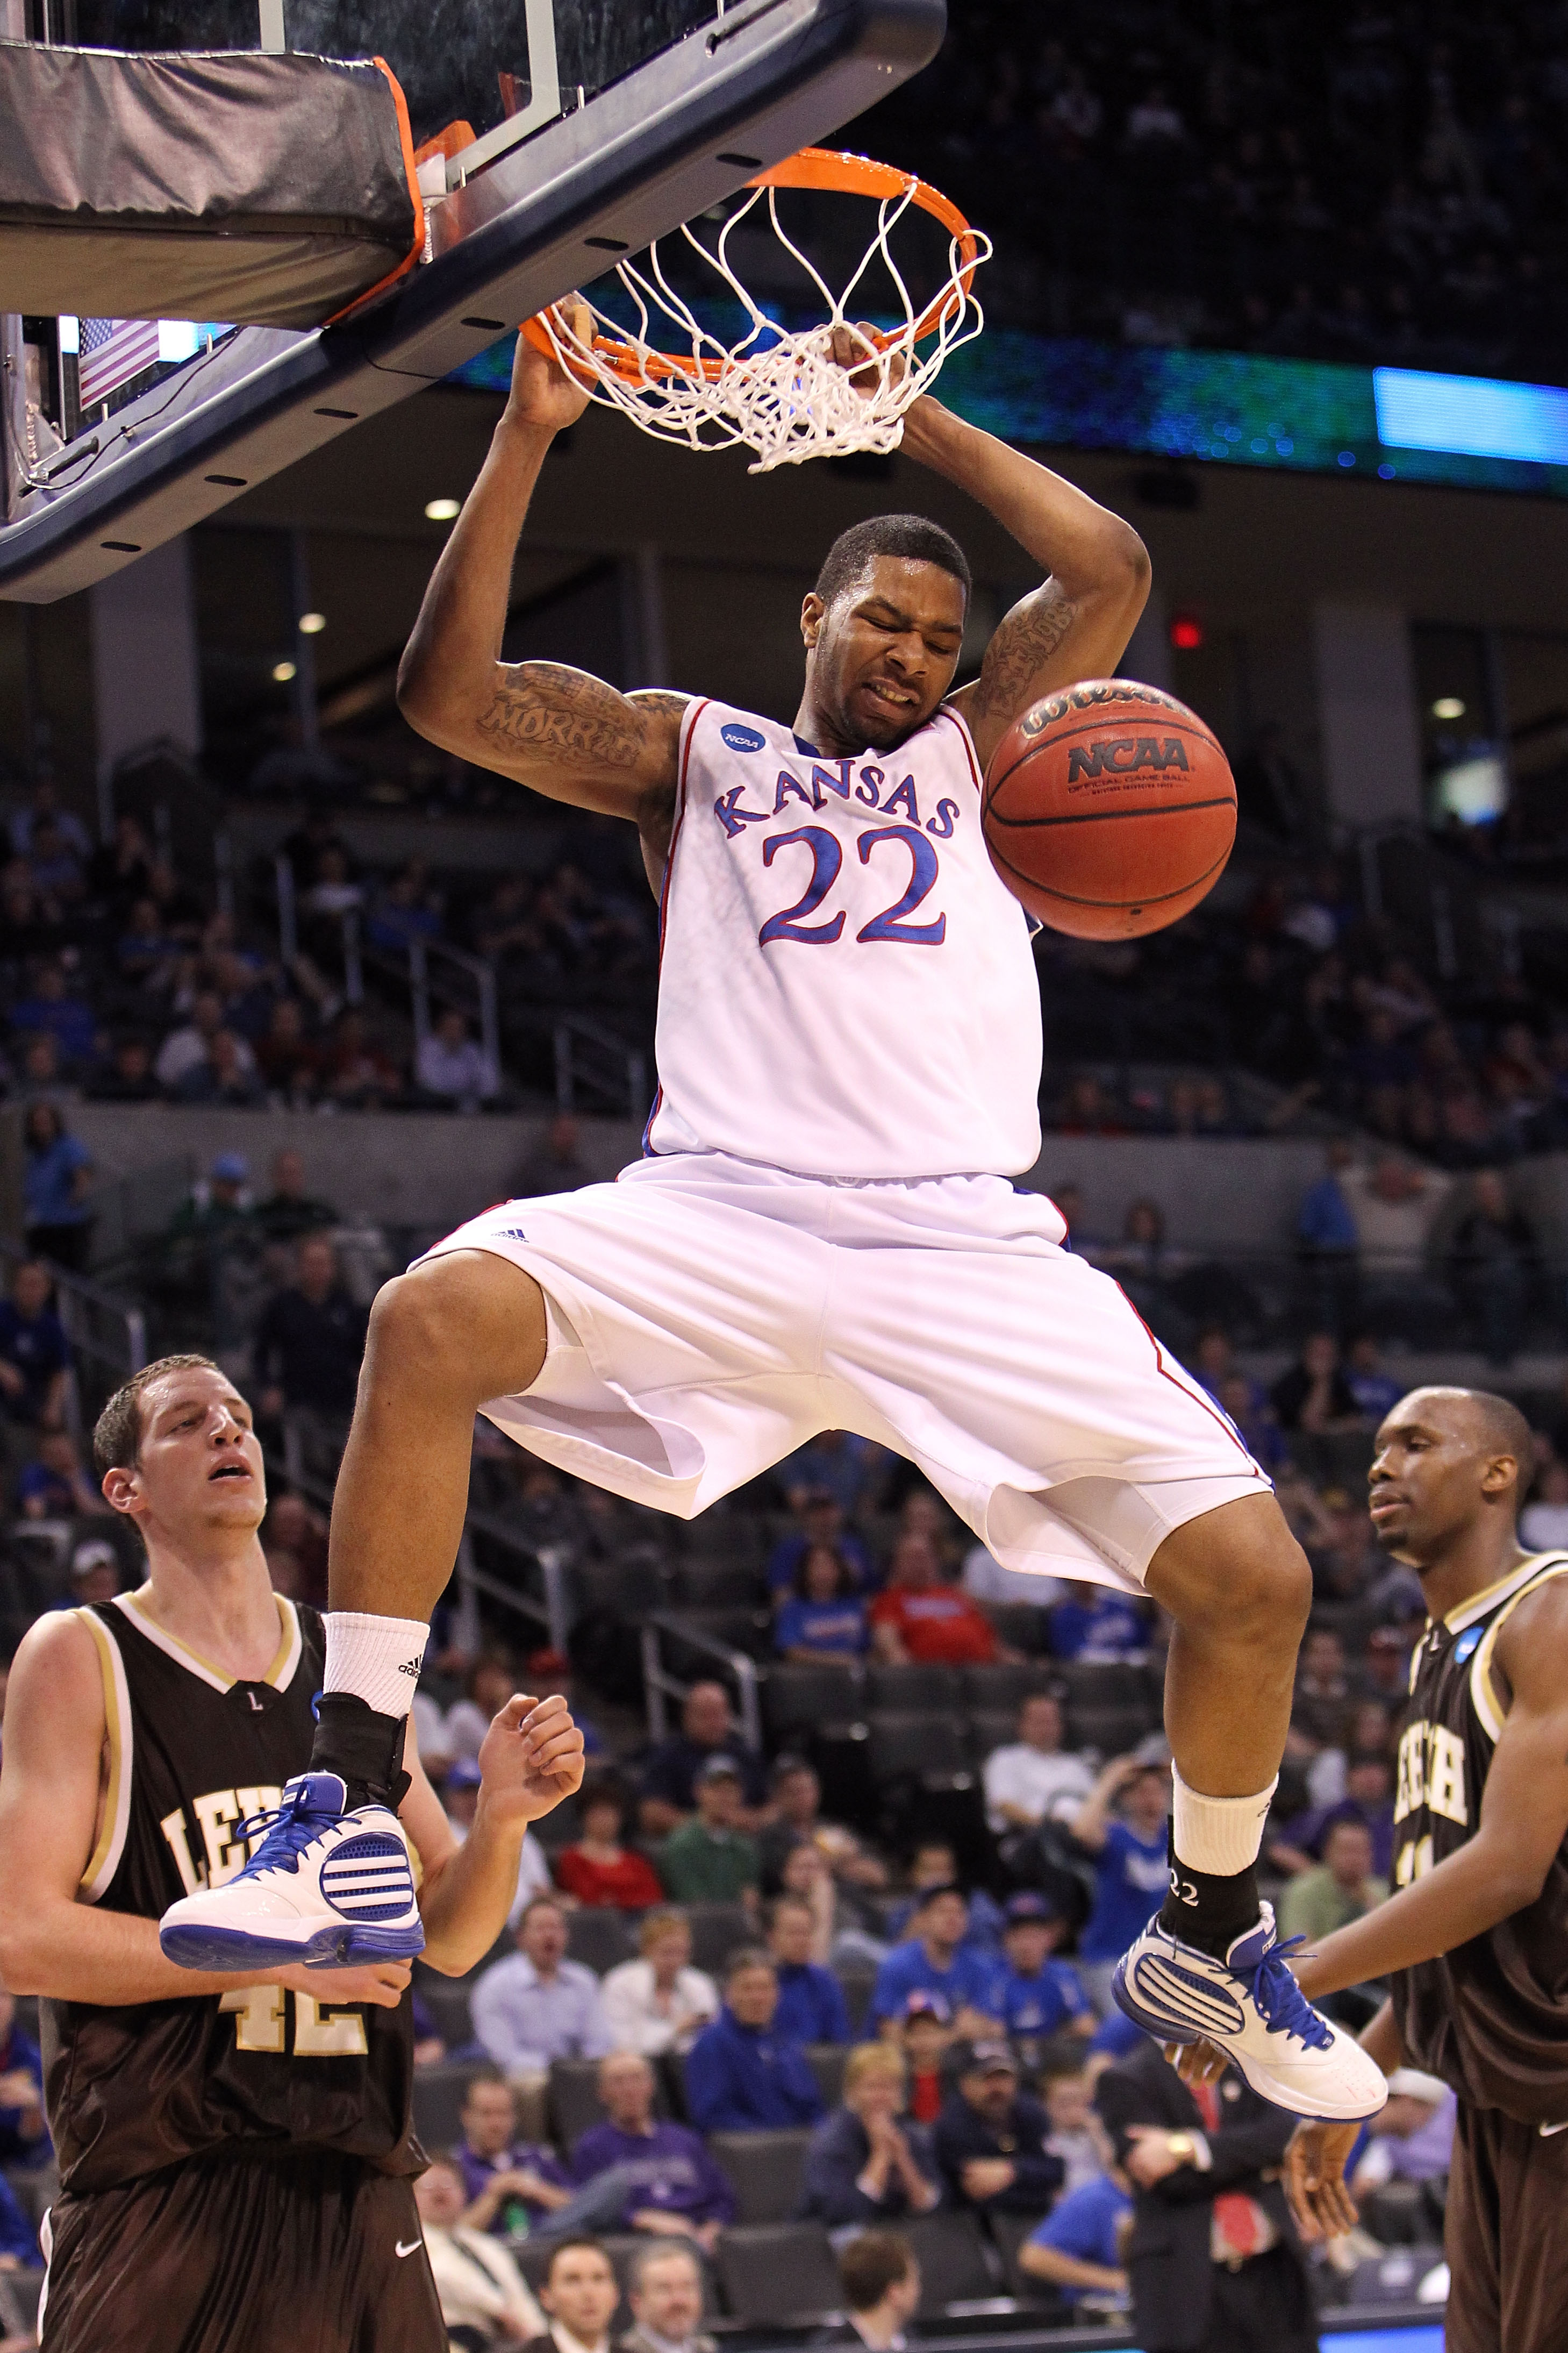 OKLAHOMA CITY - MARCH 18:  Marcus Morris #22 of the Kansas Jayhawks dunks against the Lehigh Mountain Hawks during the first round of the 2010 NCAA men's basketball tournament at Ford Center on March 18, 2010 in Oklahoma City, Oklahoma.  (Photo by Ronald